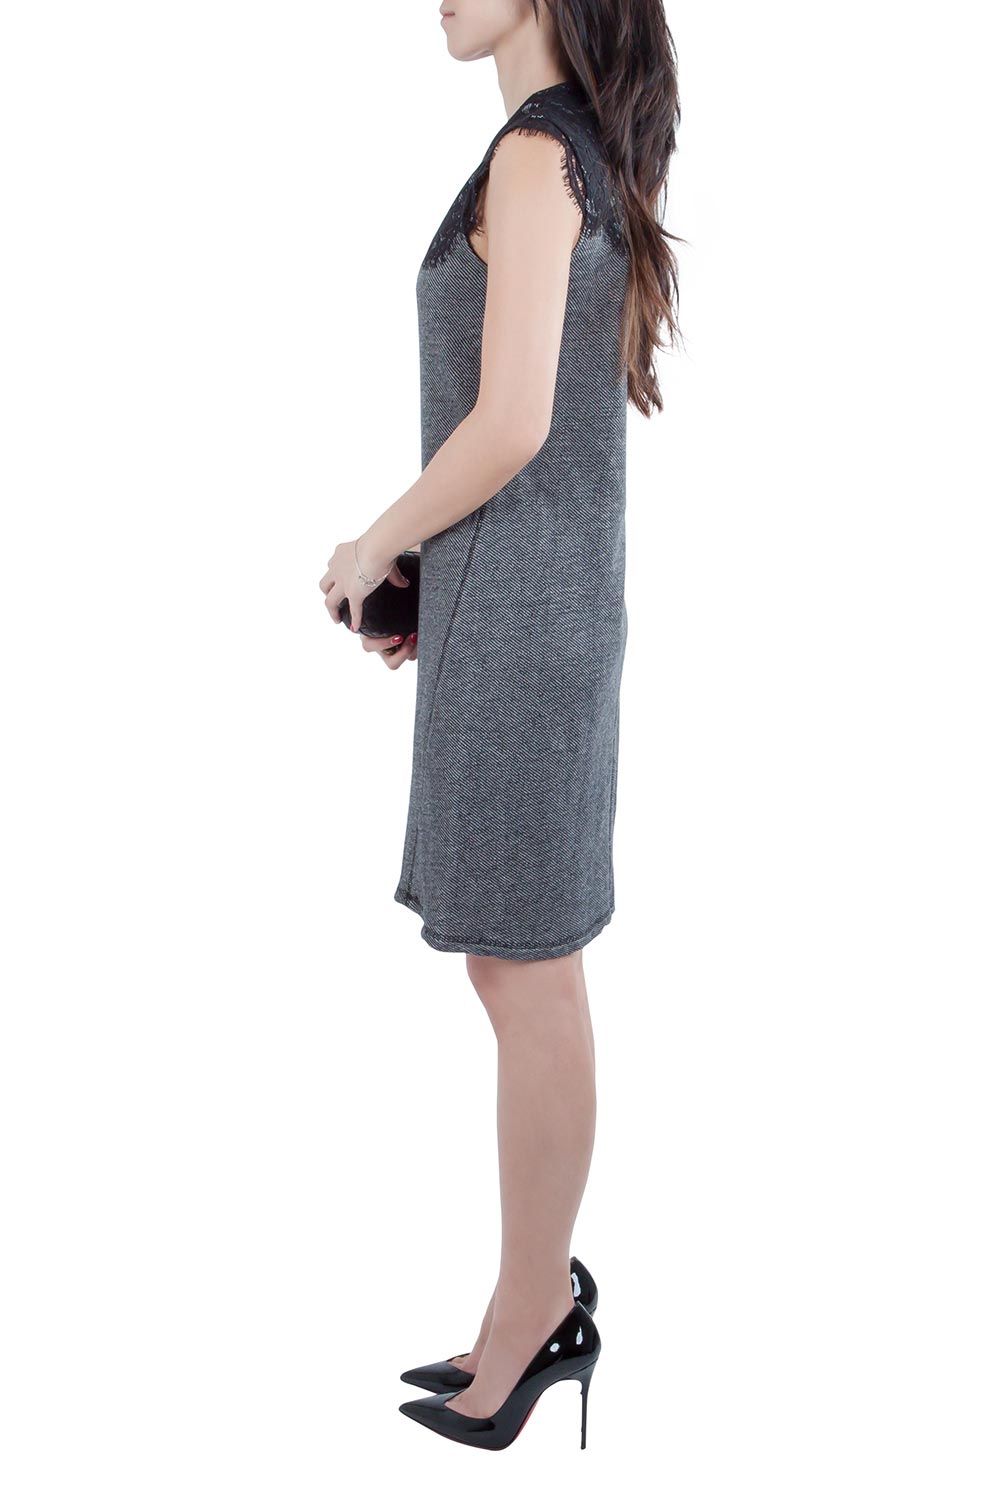 Sea Grey Wool and Lace Neckline Detail Sleeveless Dress S